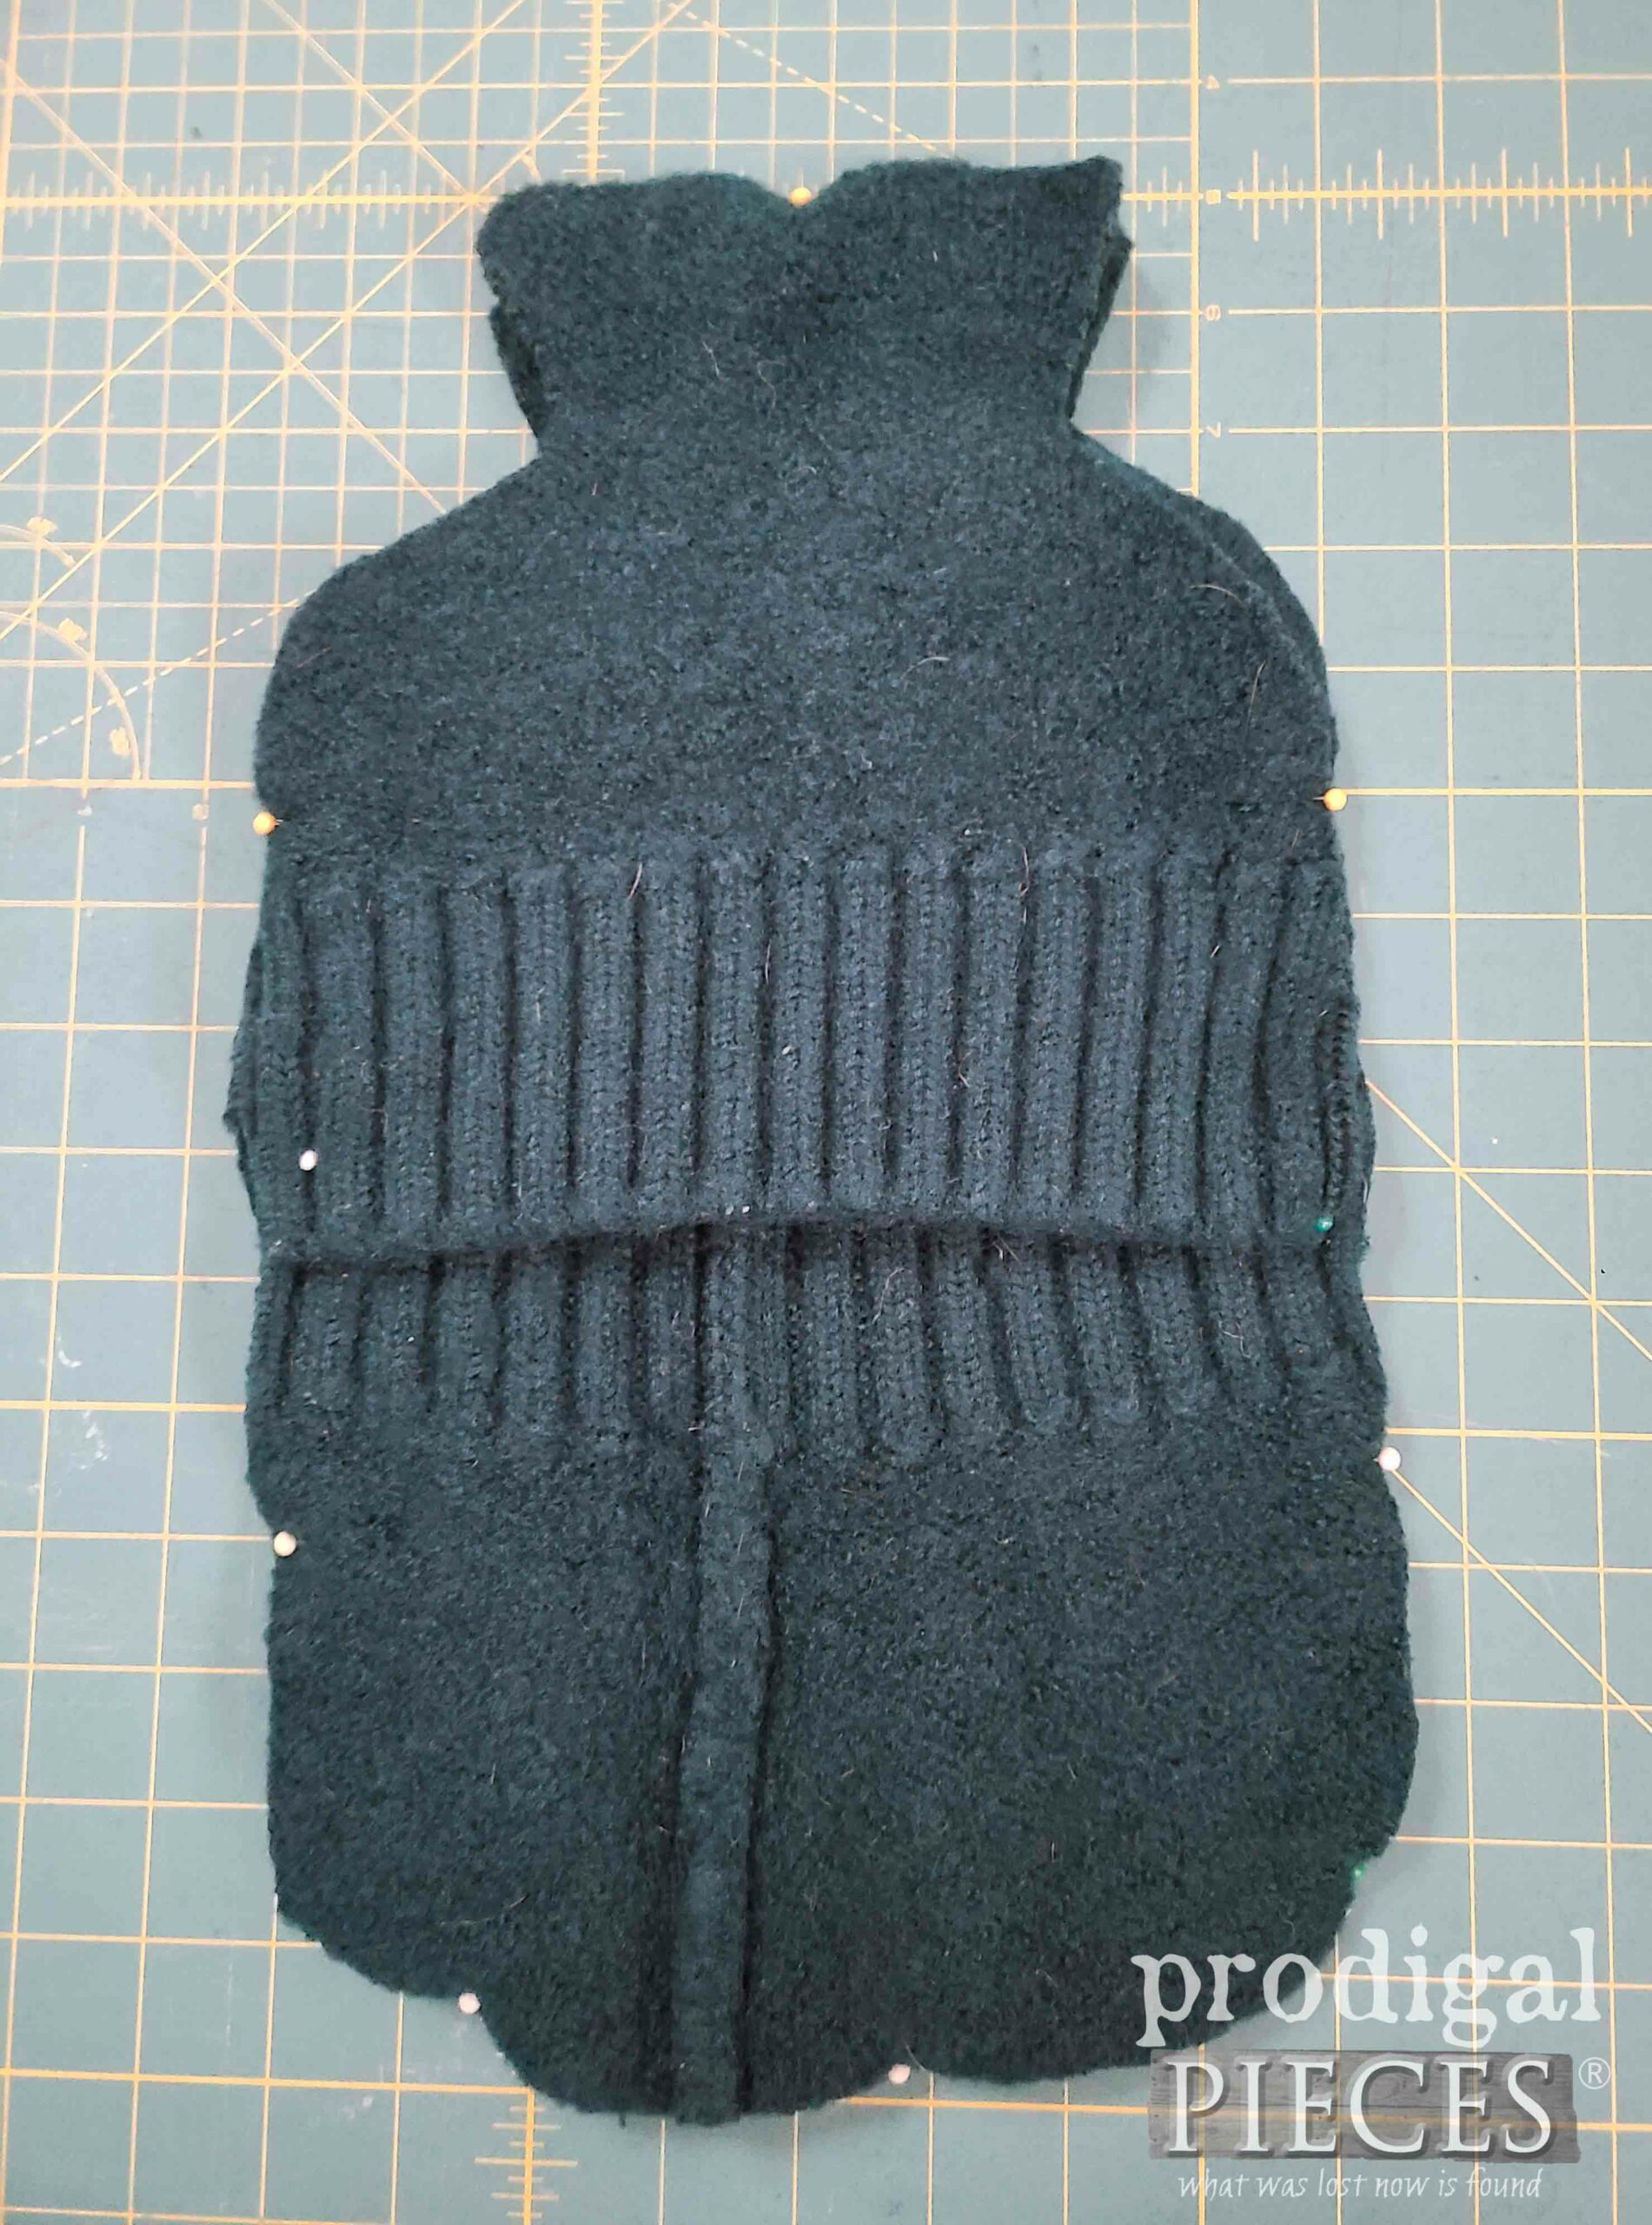 Pinned Hot Water Bottle Cover | prodigalpieces.com #prodigalpieces